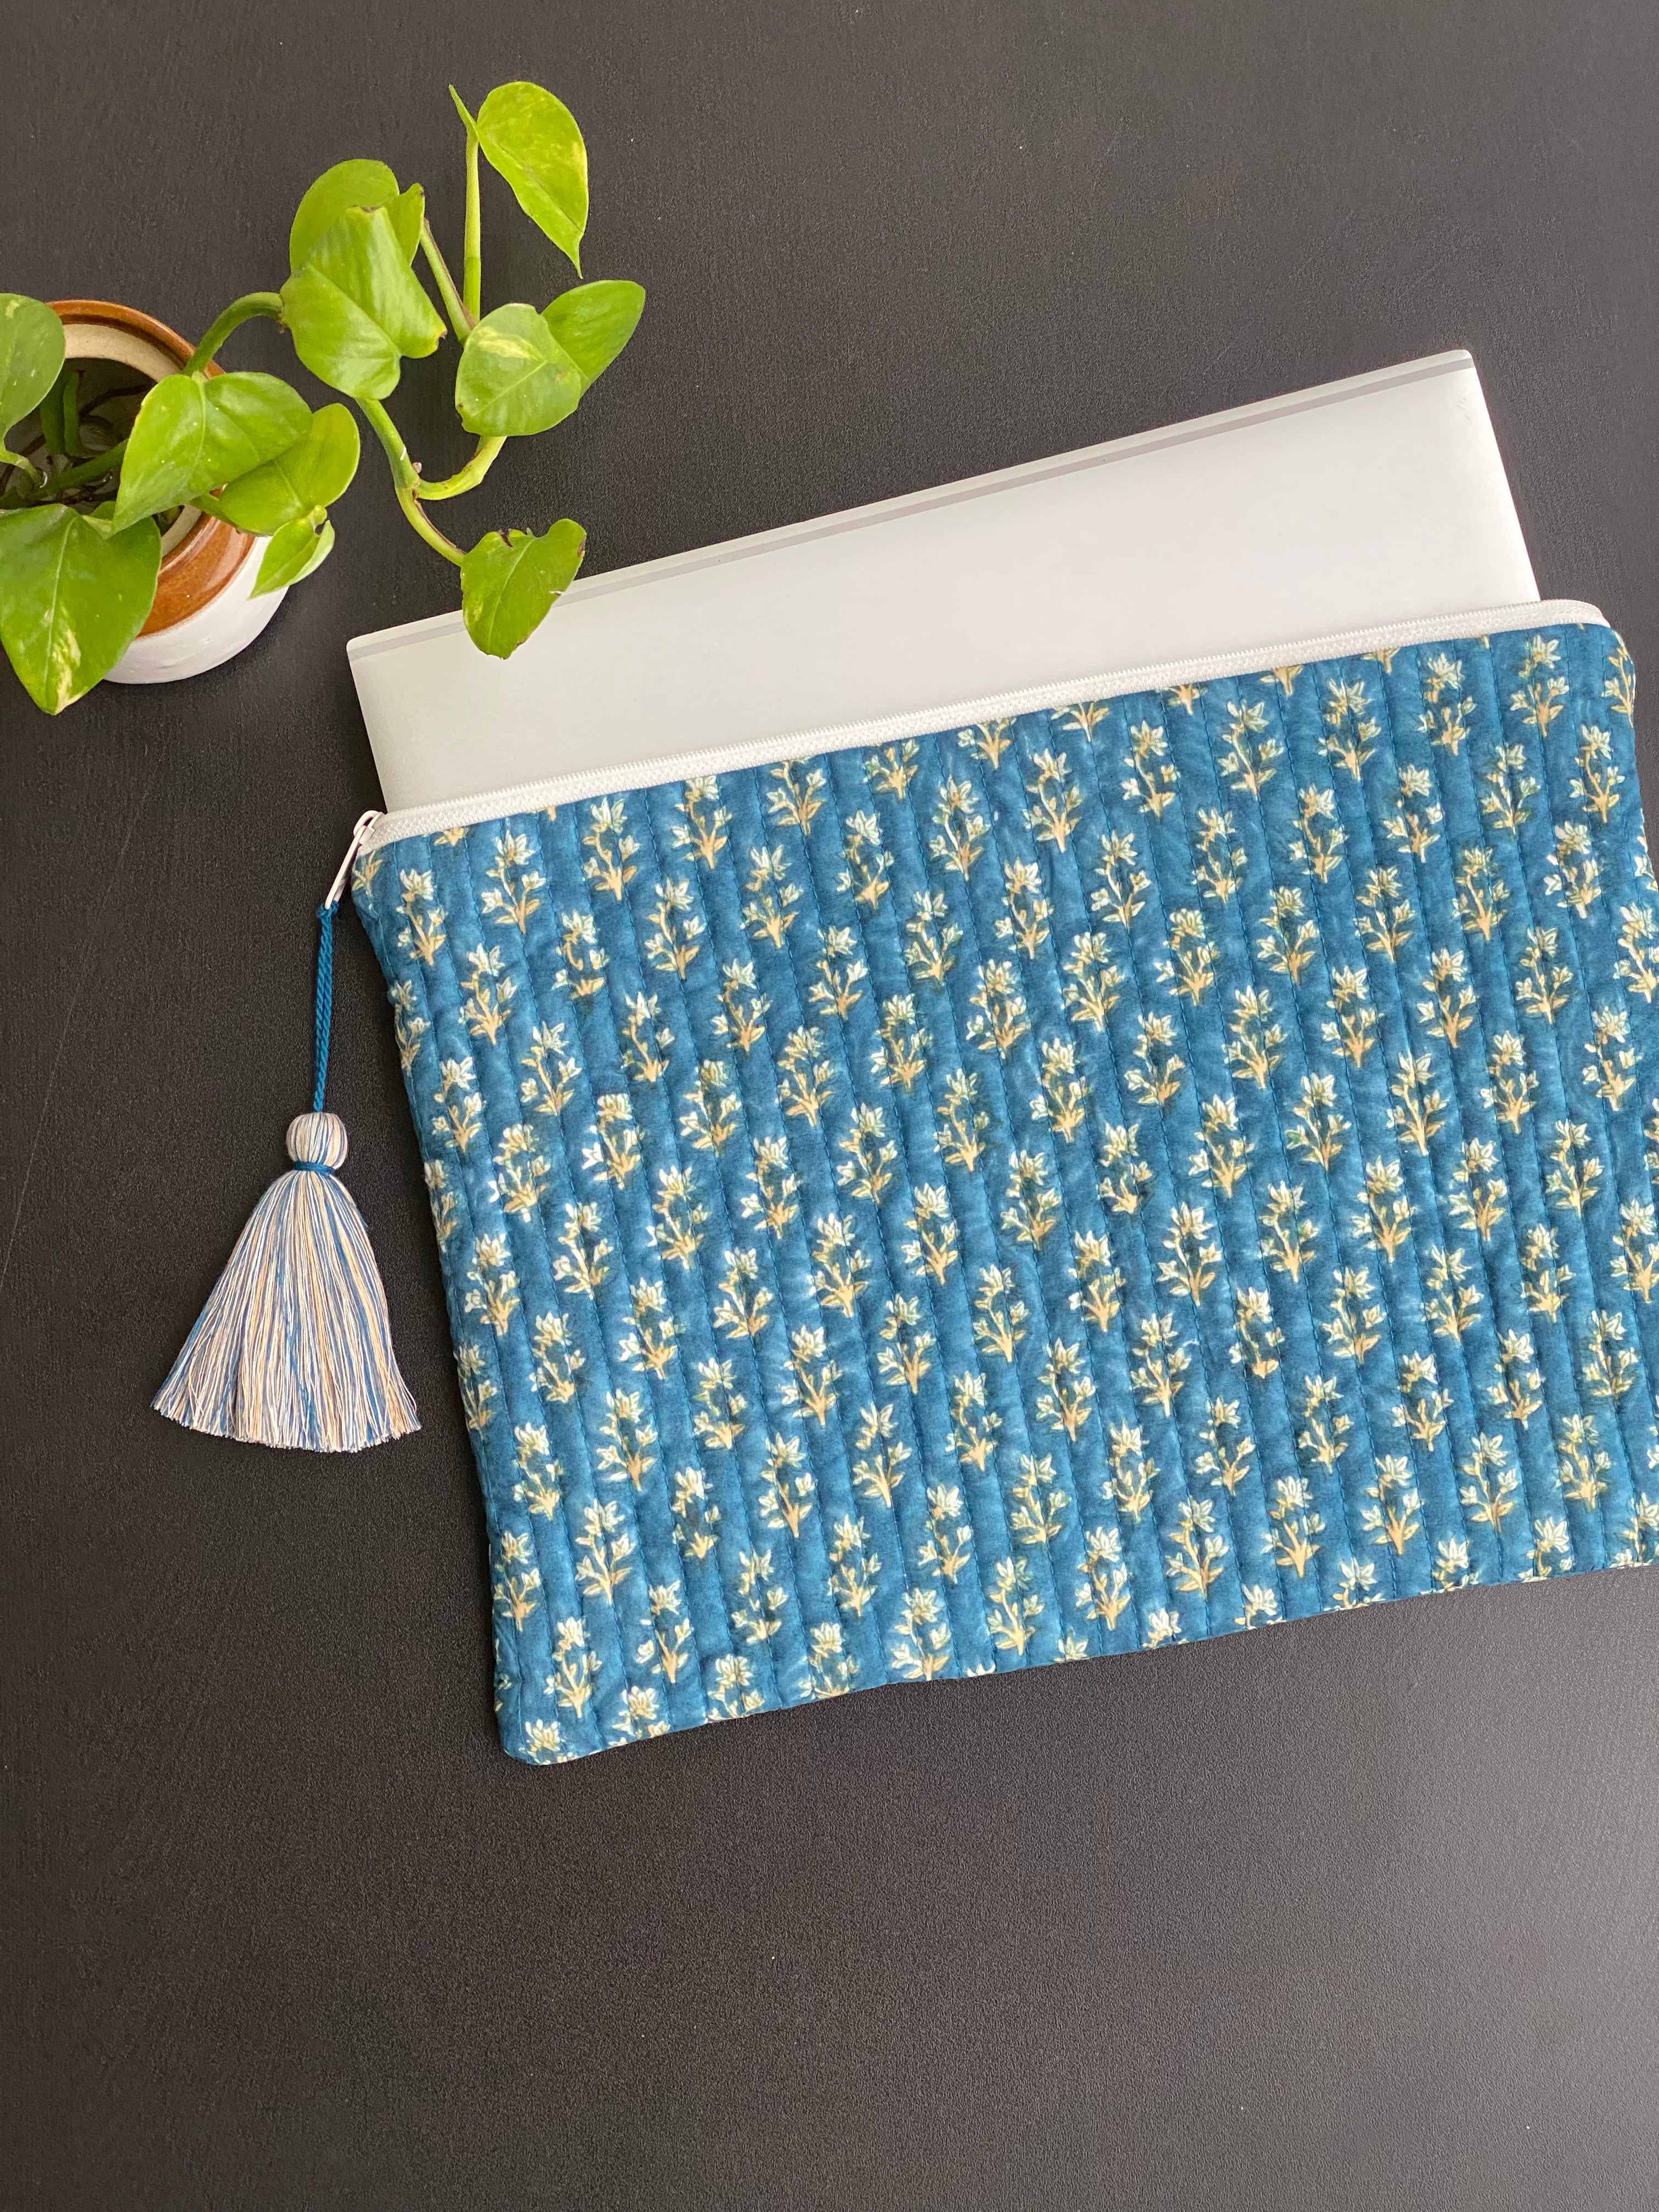 Laptop Sleeve/ Cover - 13 inch